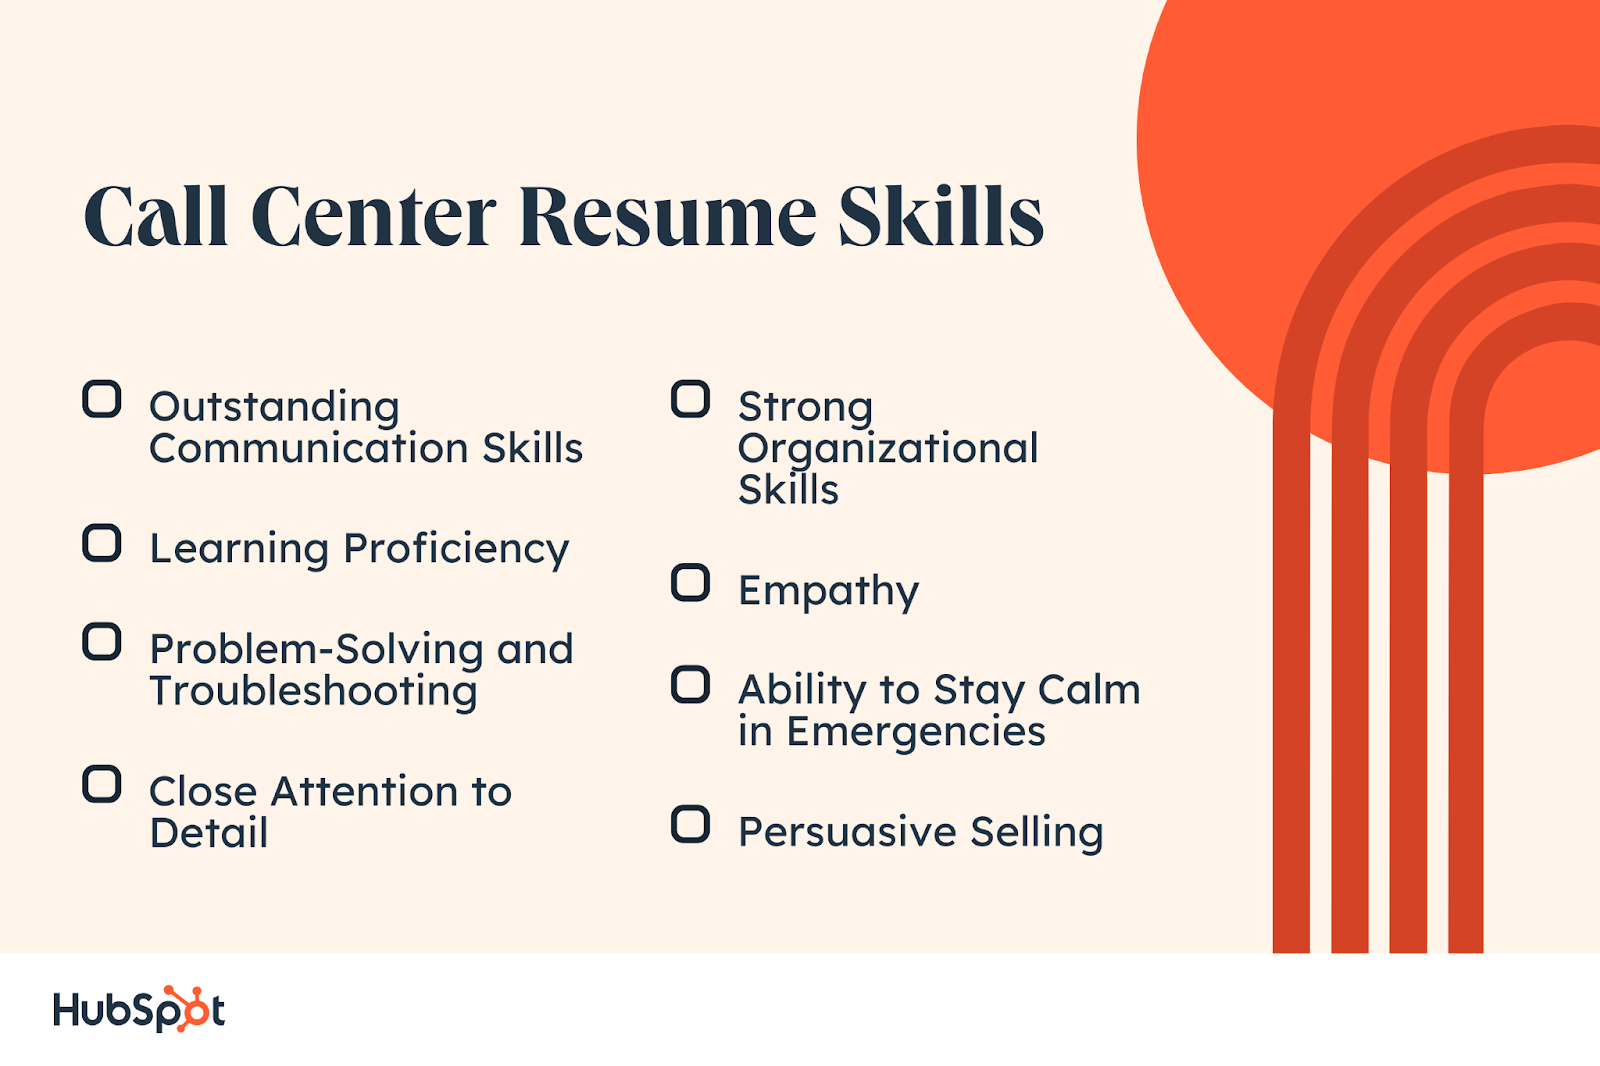 call center resume examples, Call Center Resume Skills. Outstanding Communication Skills. Close Attention to Detail. Learning Proficiency. Strong Organizational Skills. Problem-Solving and Troubleshooting. Empathy. Ability to Stay Calm in Emergencies. Persuasive Selling